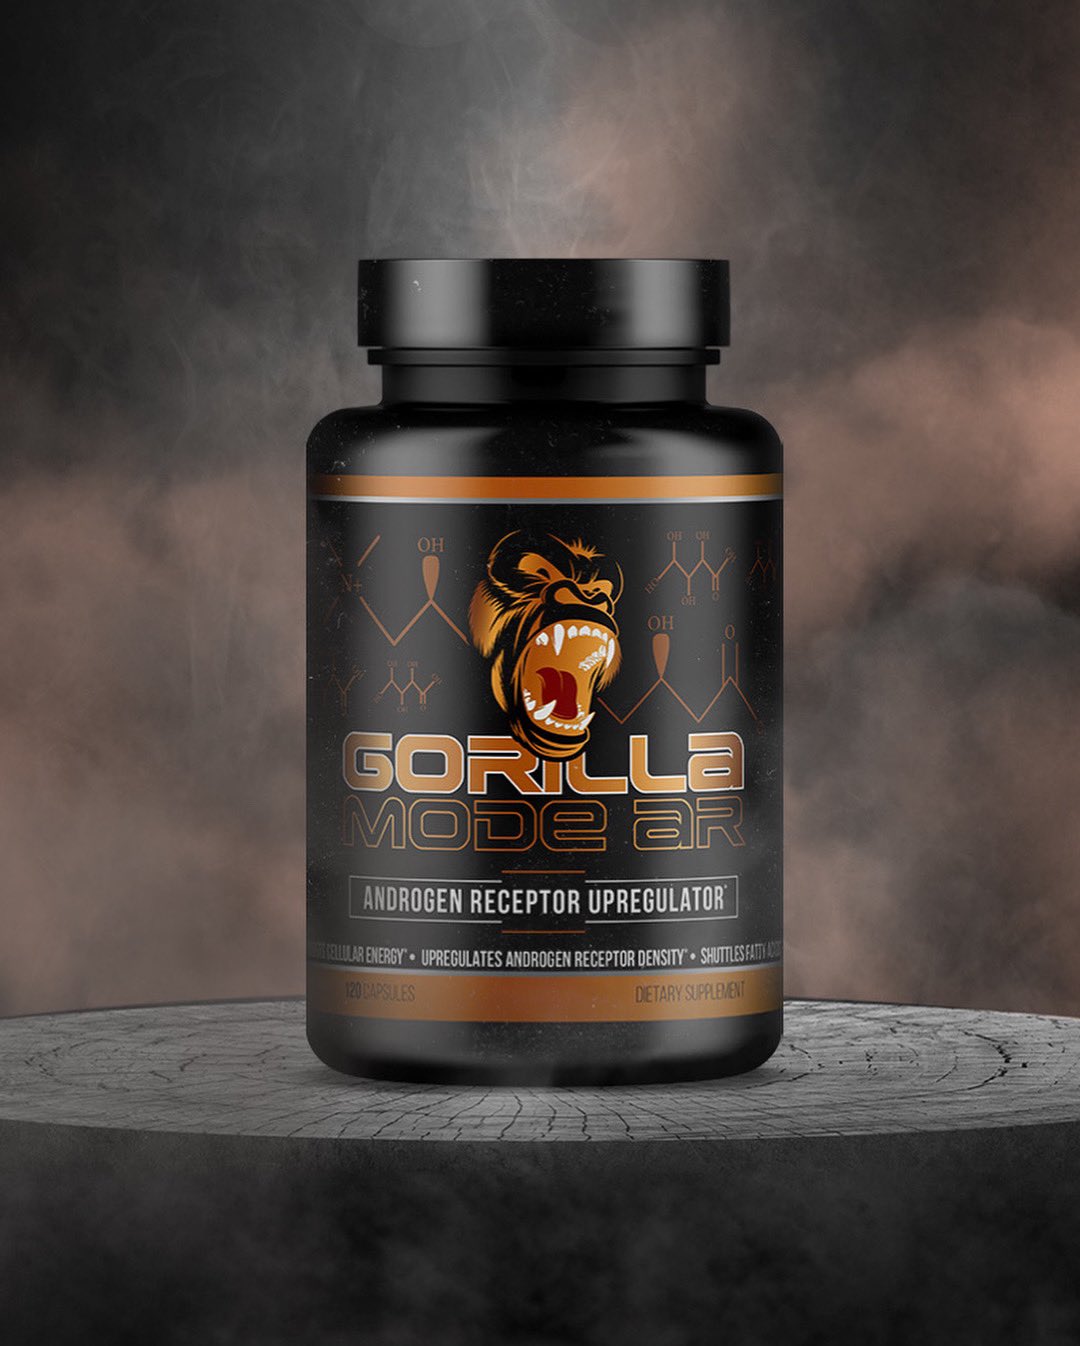 Gorilla Mode is out of stock BUT we'll have a restock in only a few days! ⁣  ⁣ This will be in an all new Gorilla Mode flavor. ⁣ ⁣ Guess the…